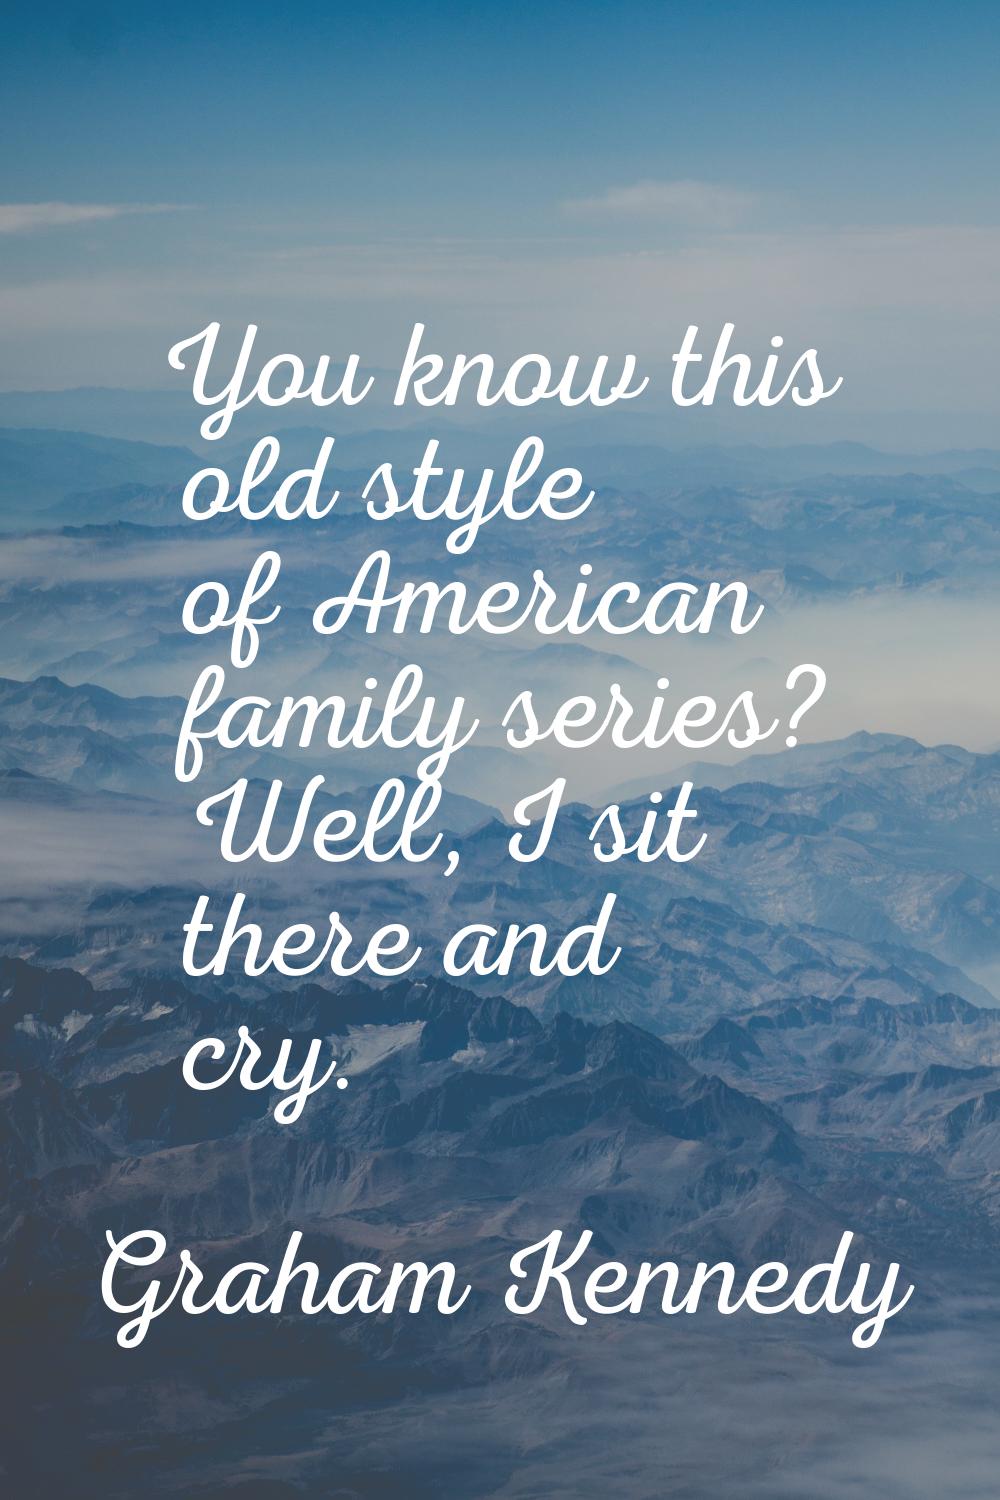 You know this old style of American family series? Well, I sit there and cry.